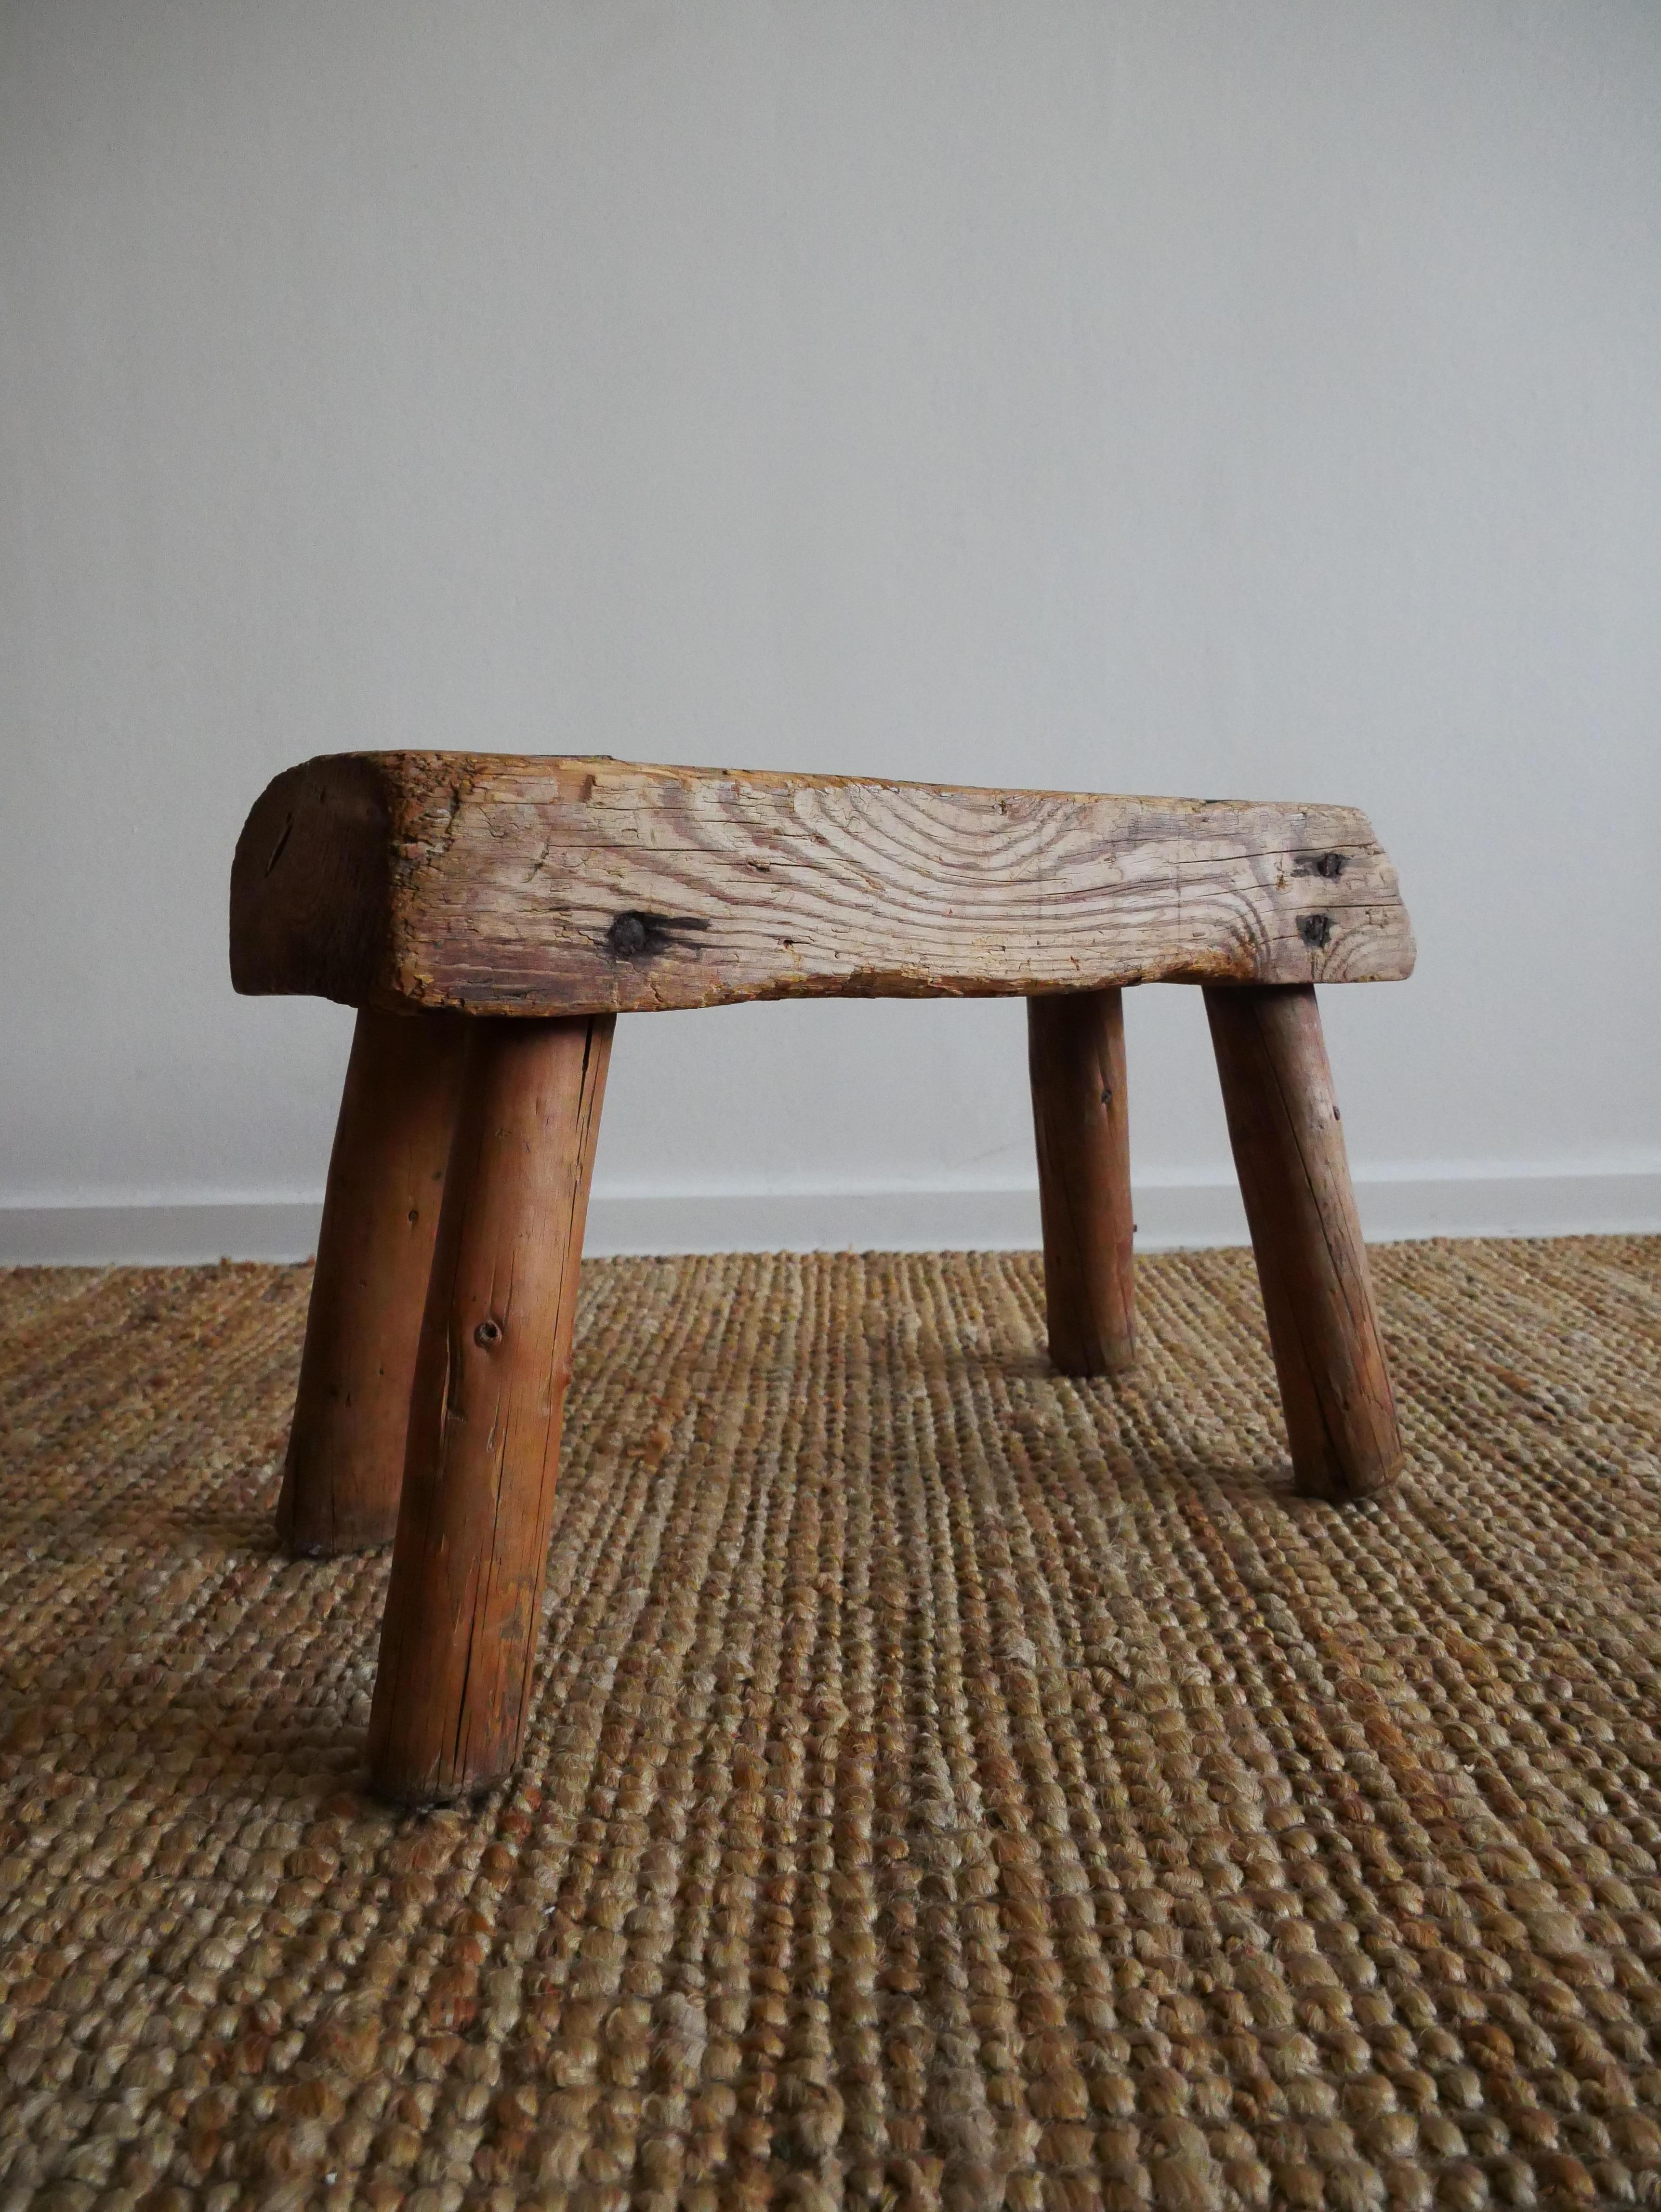 Small Swedish Stool
Made of pine wood in the late 1800-century with great patina and beautiful signs of use.